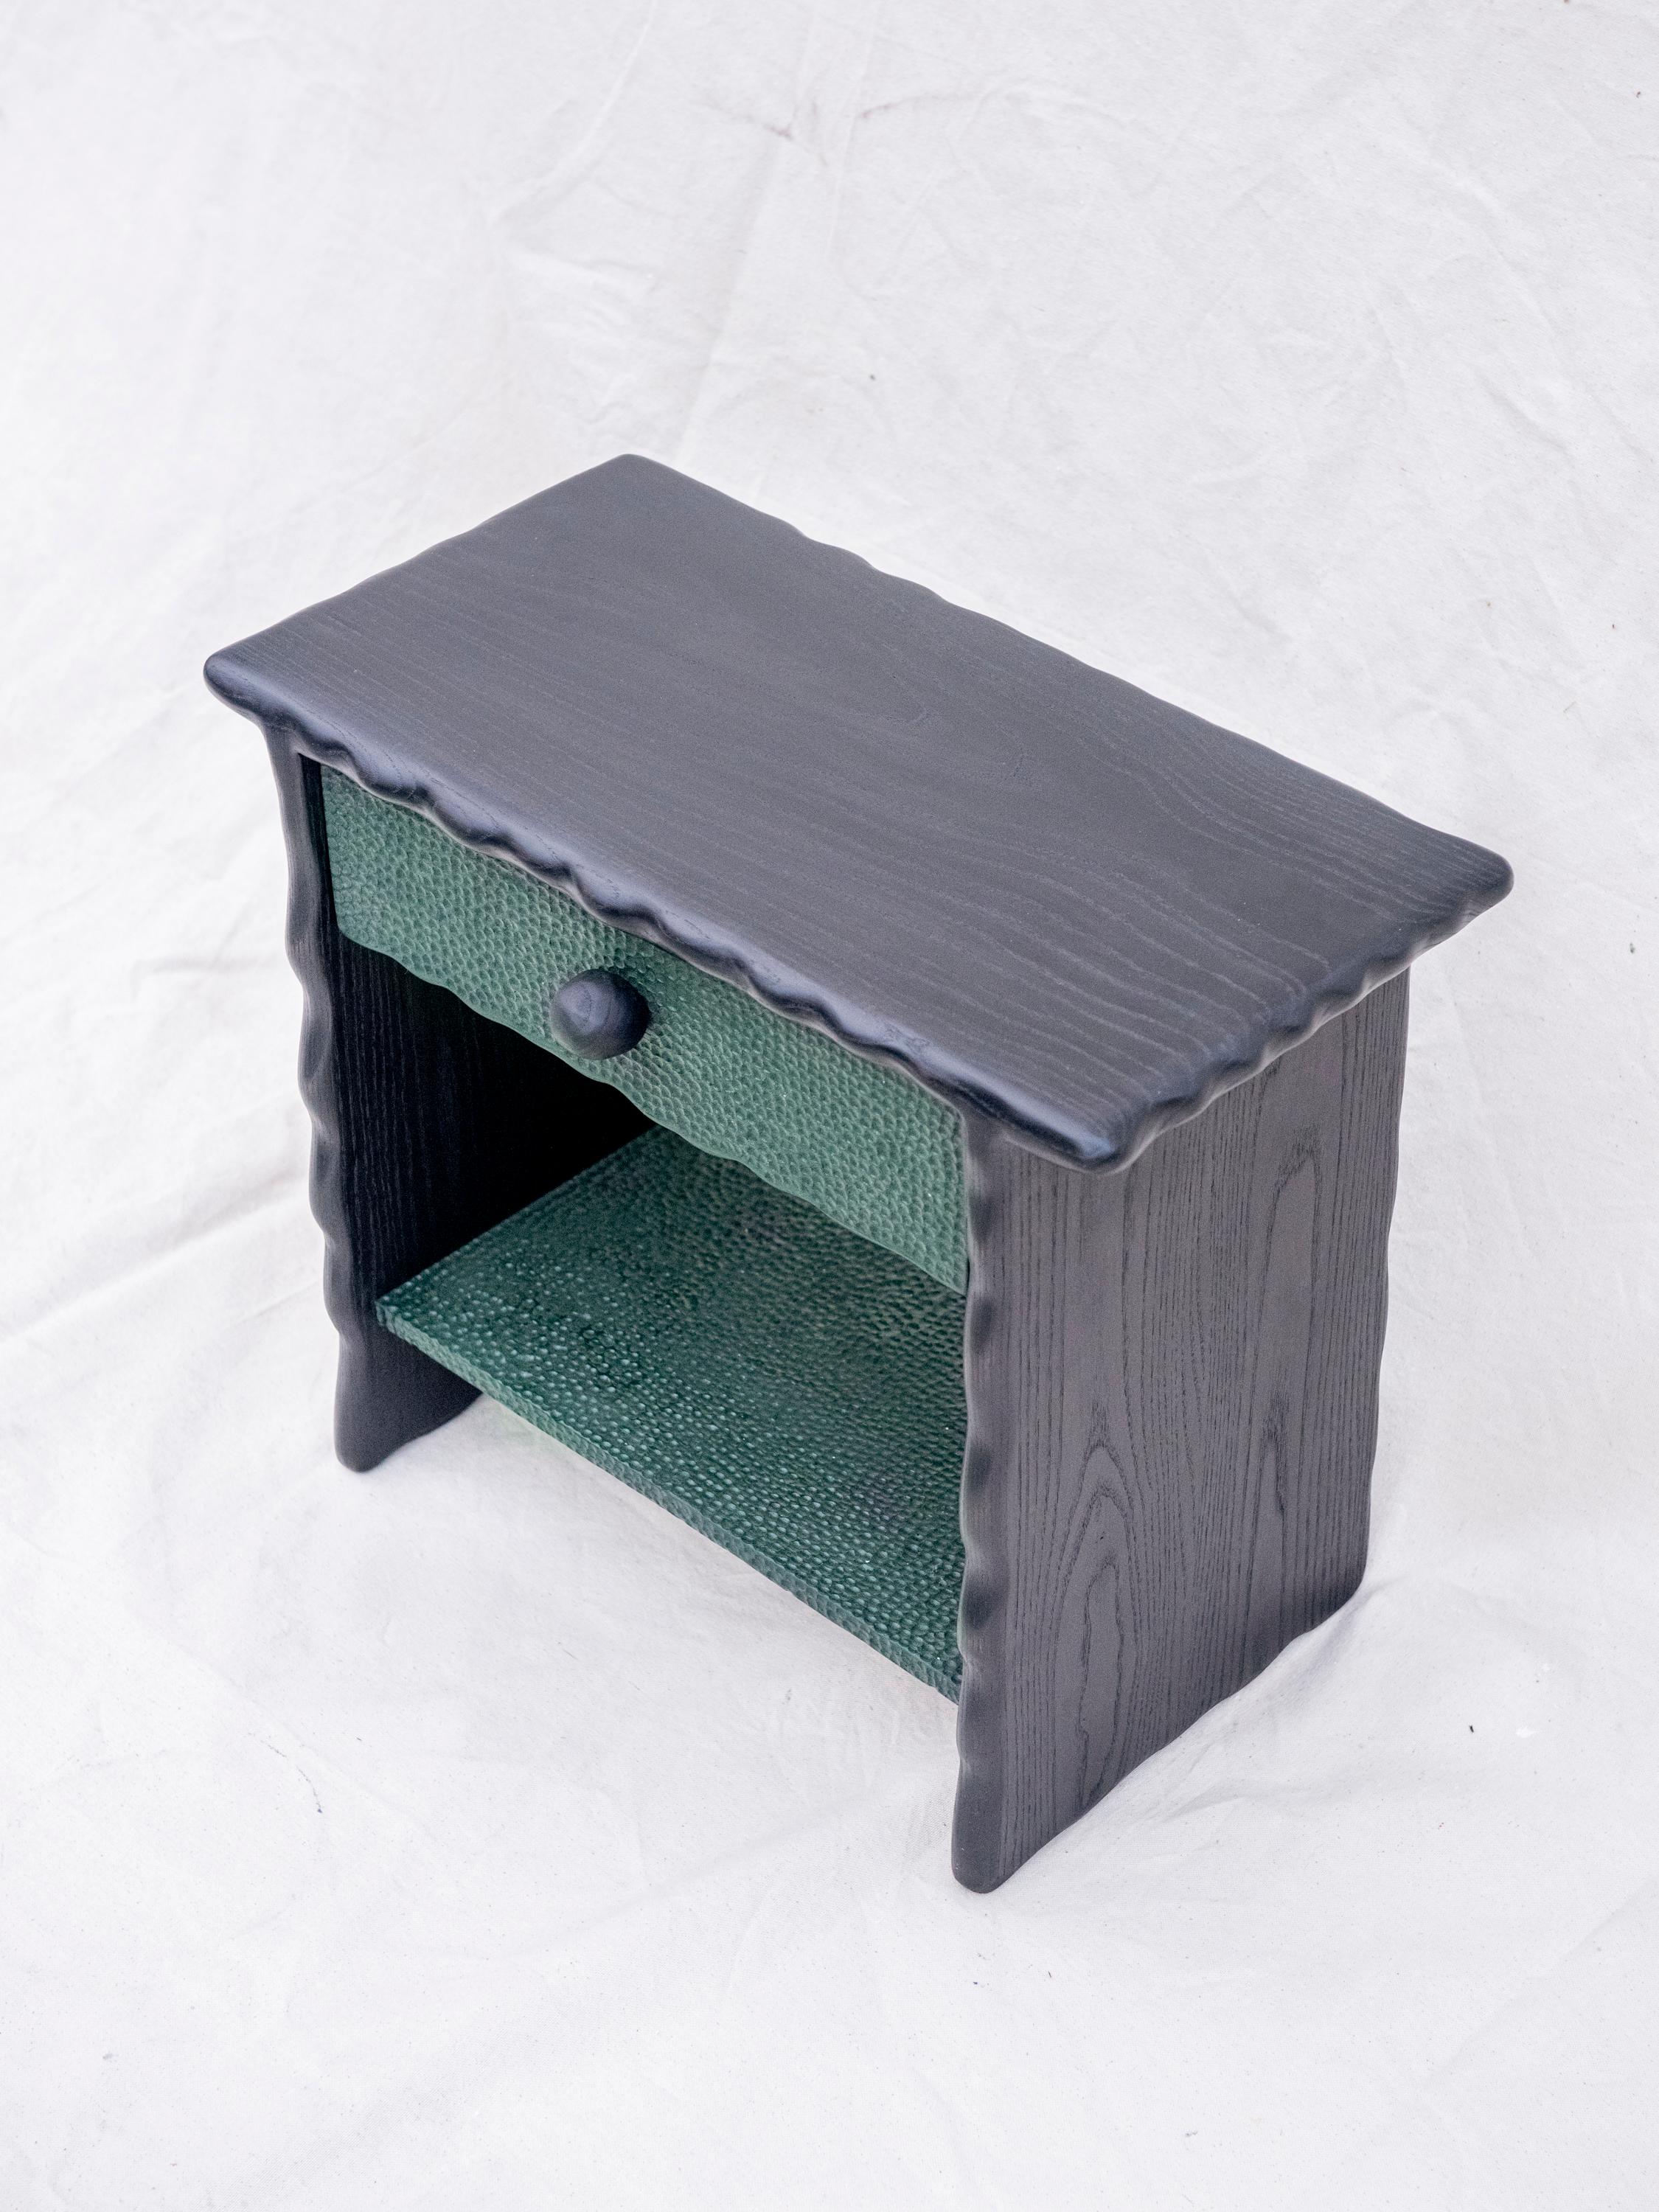 T Nightstand by Luke Malaney
Dimensions: H 46 x D 35.5 x W 51 cm
Materials: Pigmented Ash
Natural oil/wax finish

Luke Malaney designs and creates one of a kind pieces of furniture that are made to last. Using old world joinery, elegant design, and